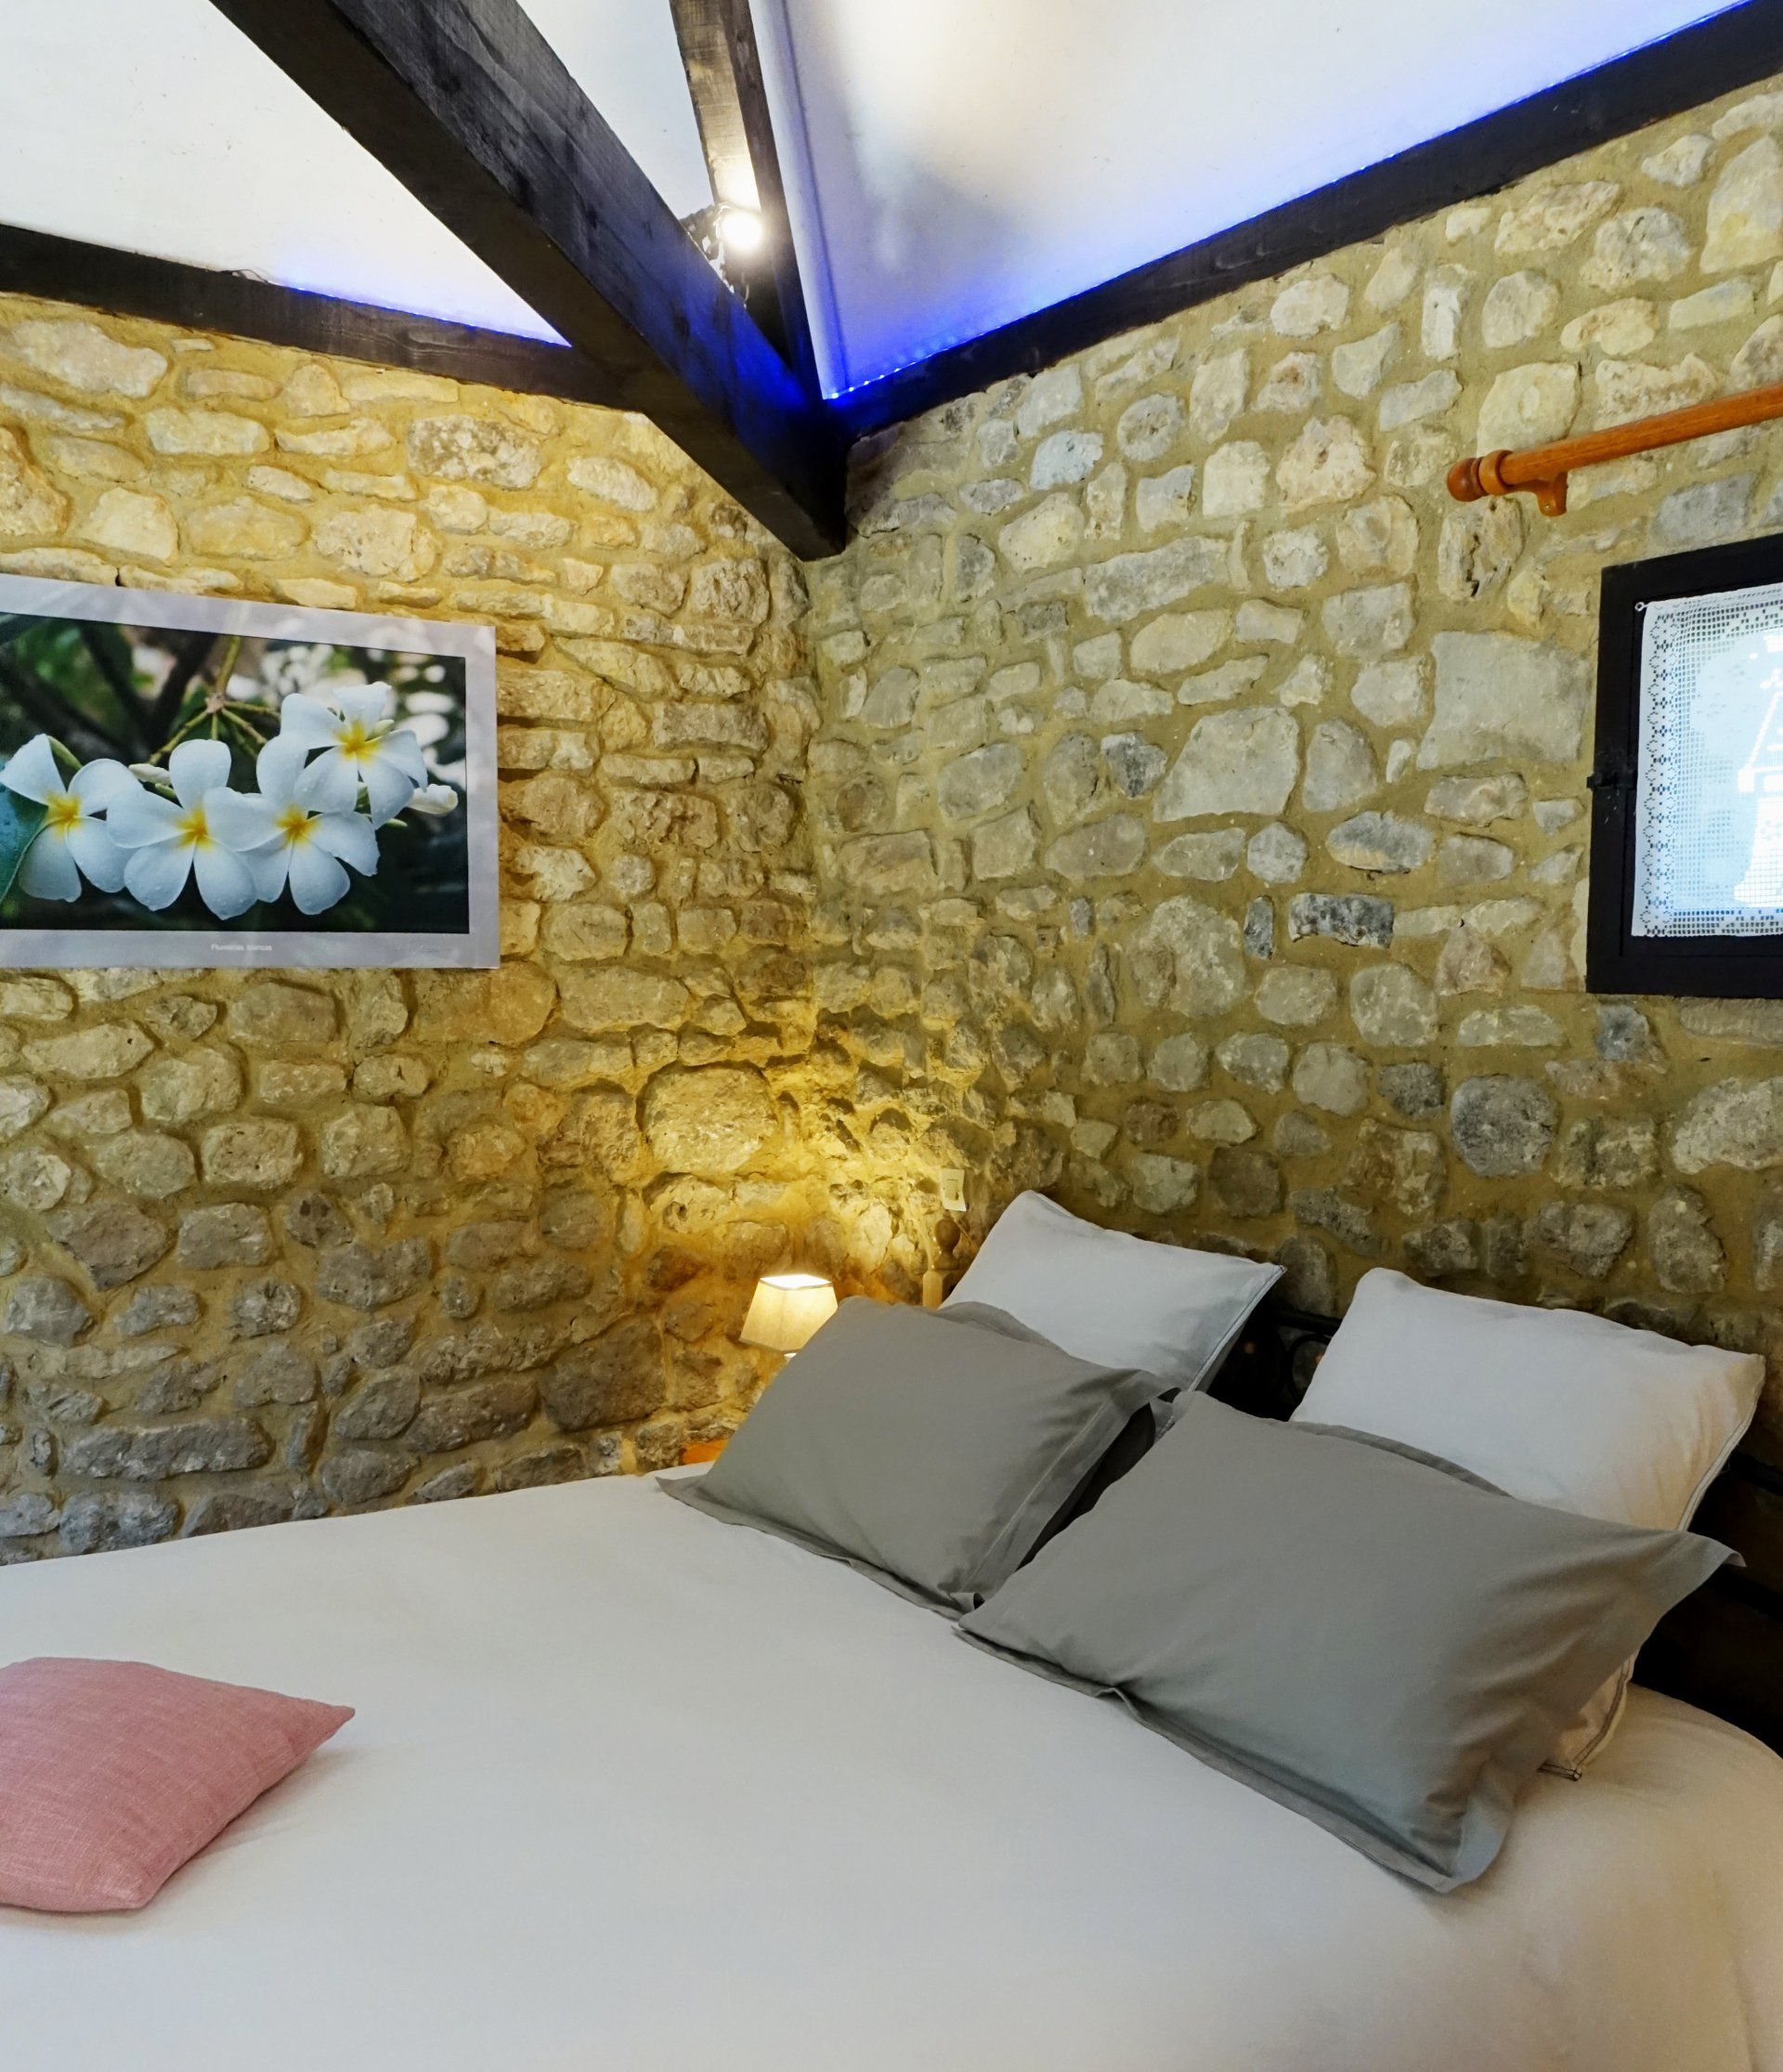 Inside view bedroom La Borie, the bed and pillows, on the stone wall white flowers photo. bedside lamp